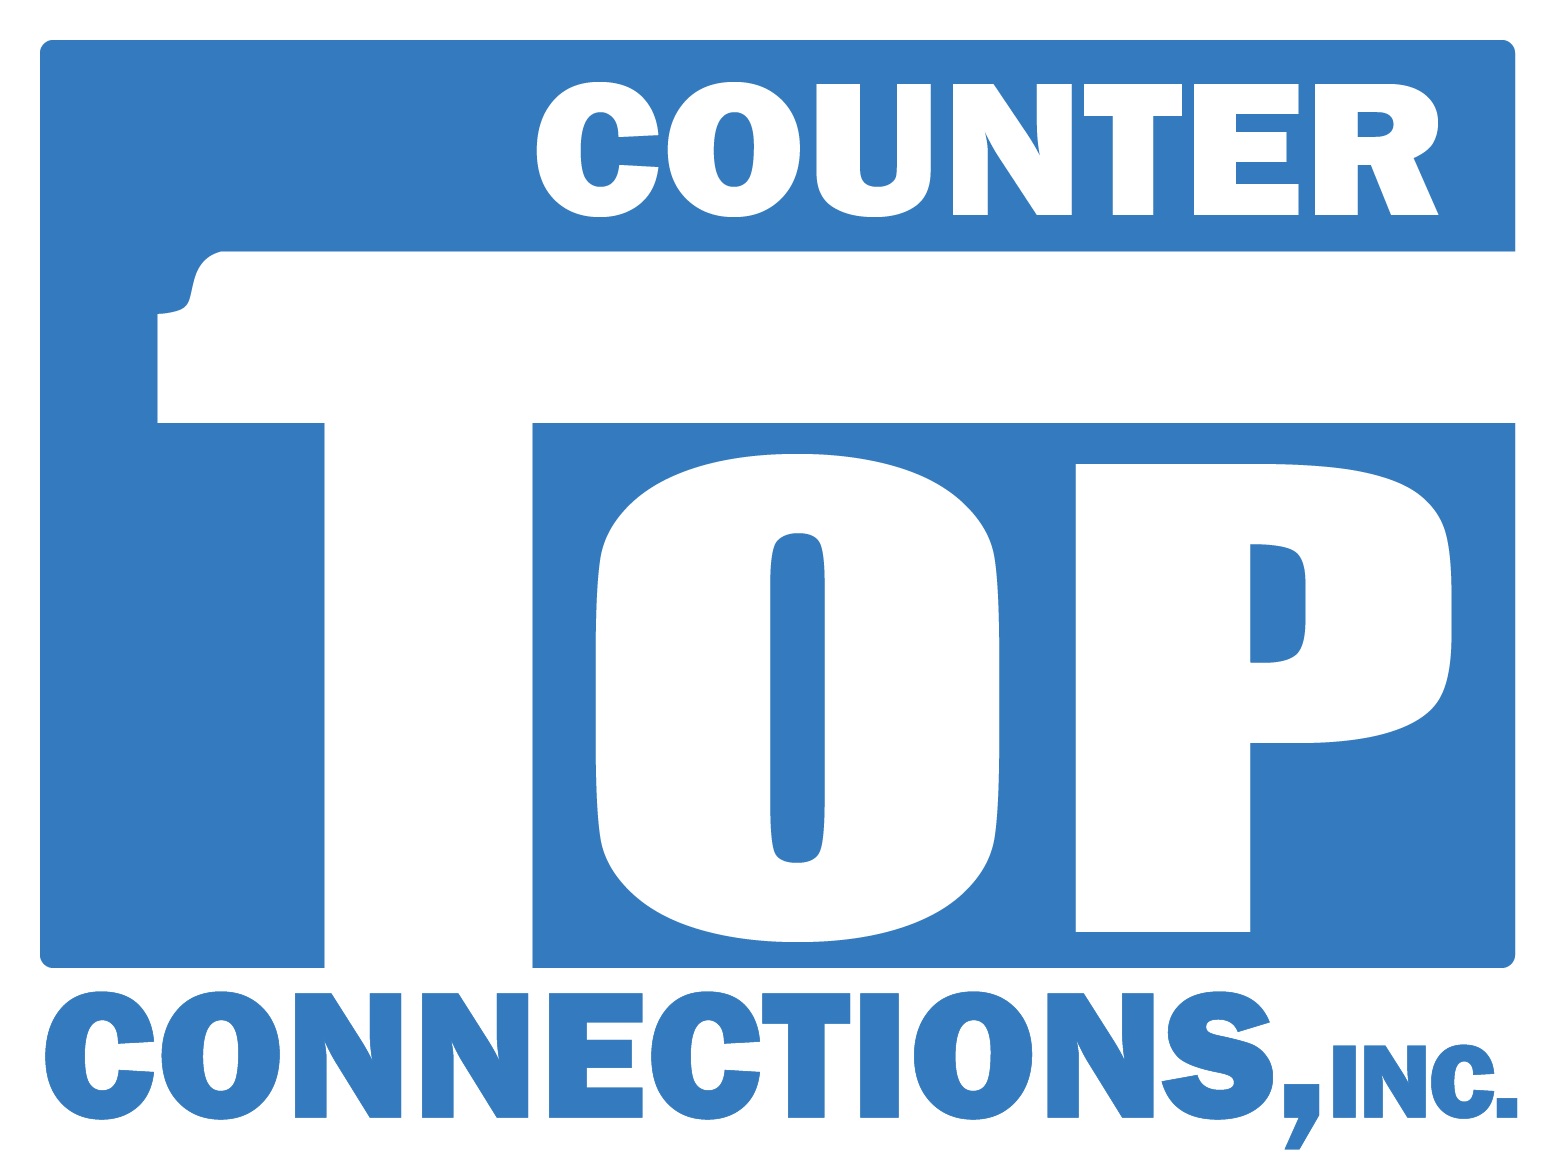 Countertop Connections Inc